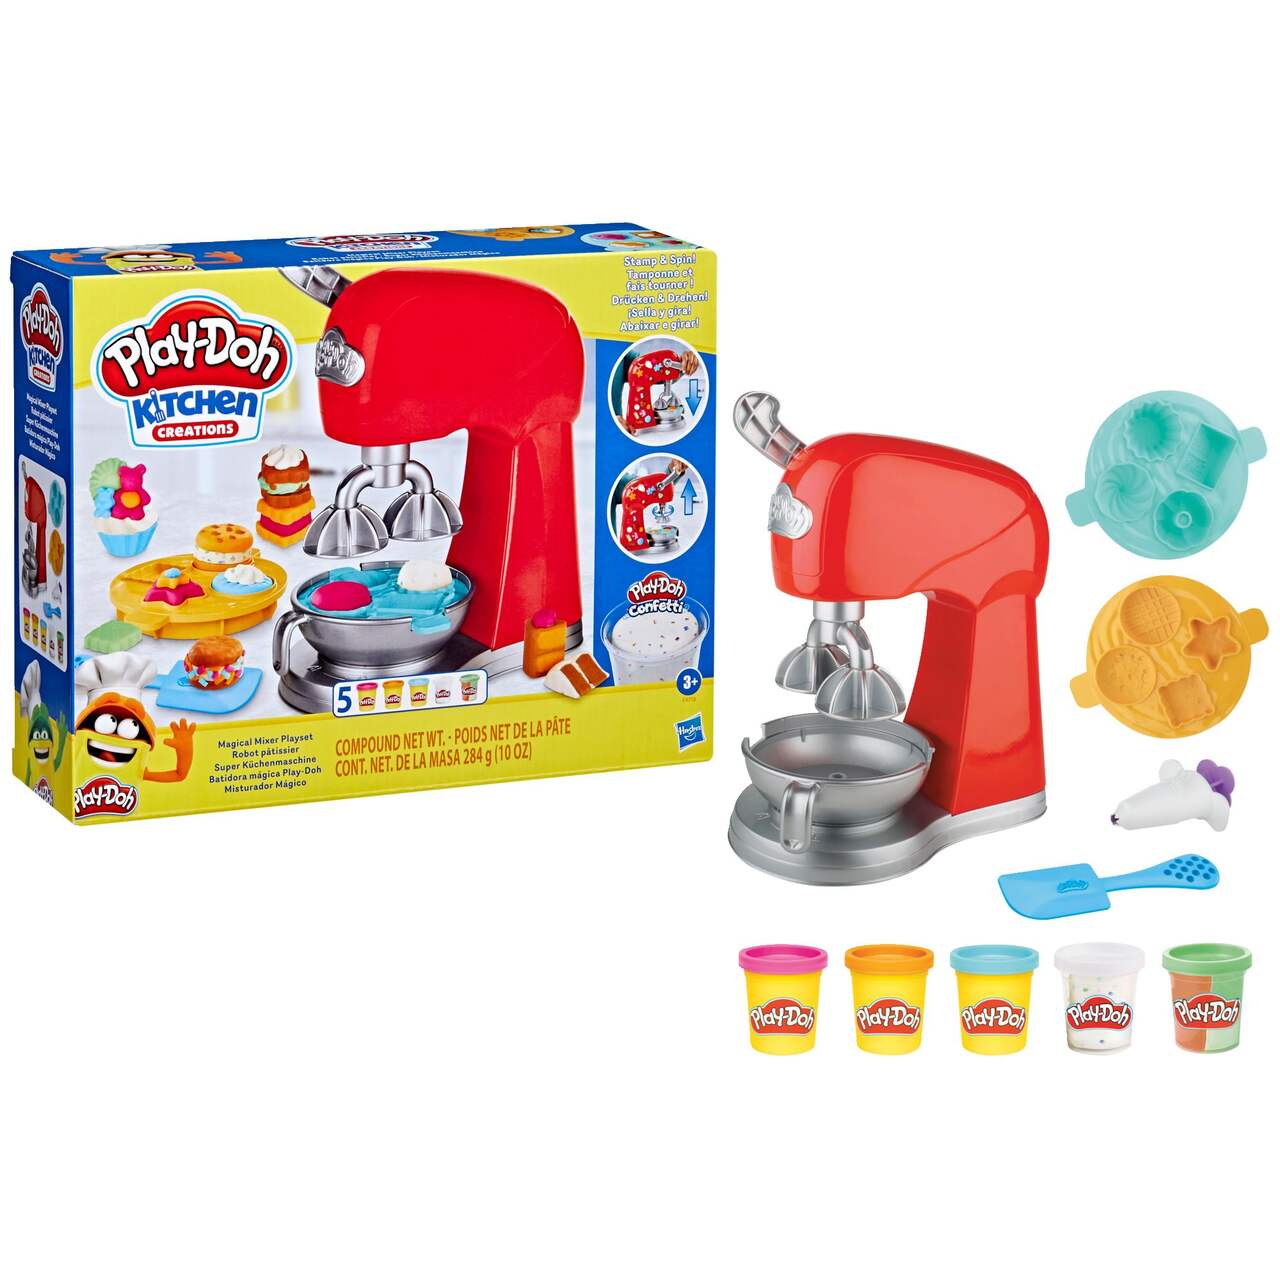 https://media-www.canadiantire.ca/product/seasonal-gardening/toys/preschool-toys-activities/0509740/play-doh-magical-mixer-playset-eab19fea-d3f6-46df-9288-434949a52e52-jpgrendition.jpg?imdensity=1&imwidth=640&impolicy=mZoom